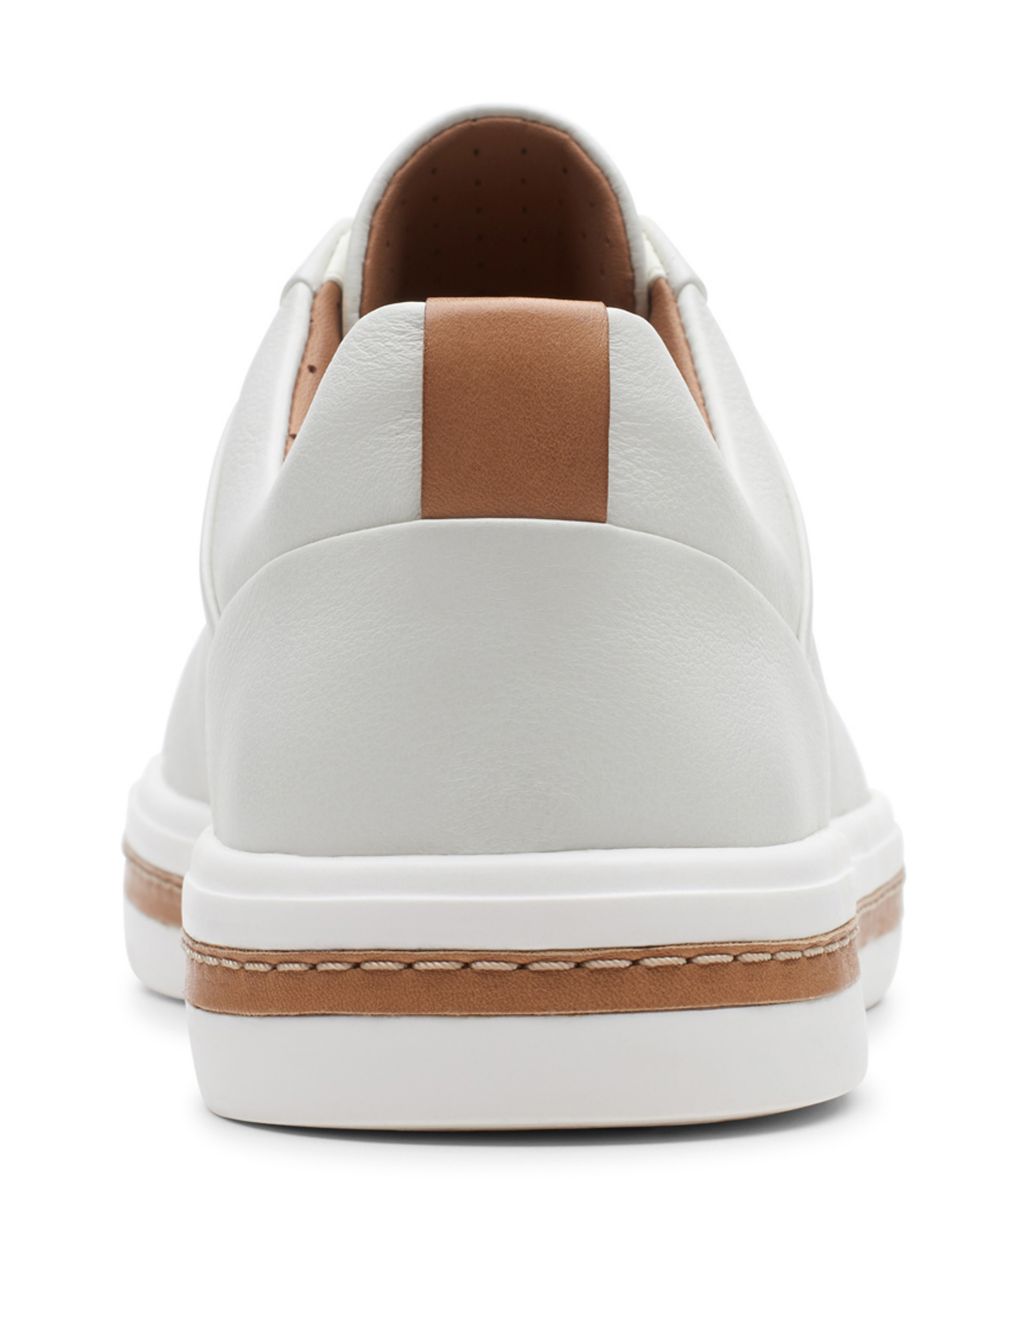 Wide Fit Leather Lace Up Trainers image 7